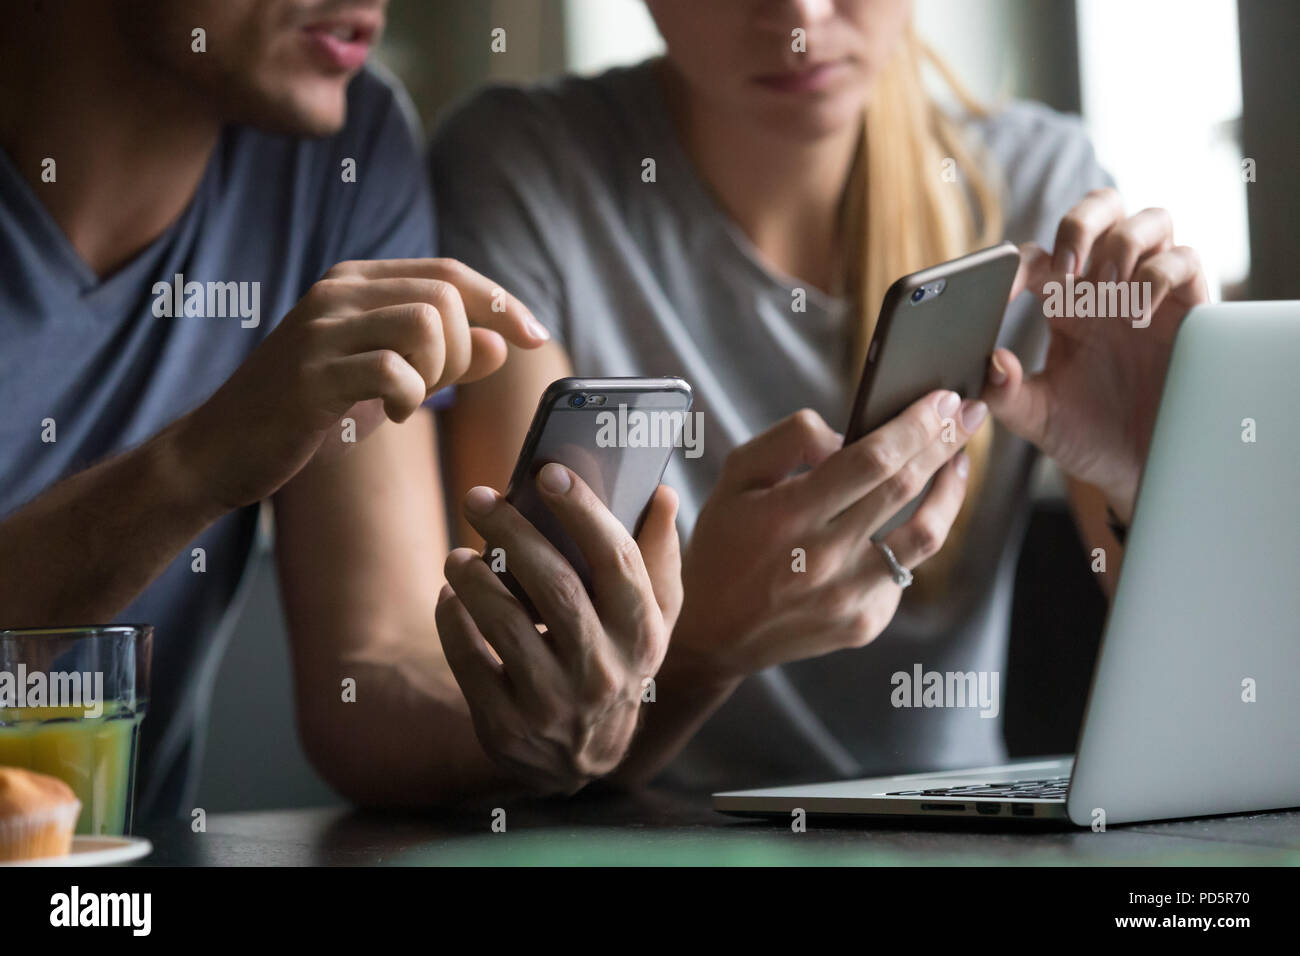 Man and woman using smartphones discussing mobile apps, close up Stock Photo